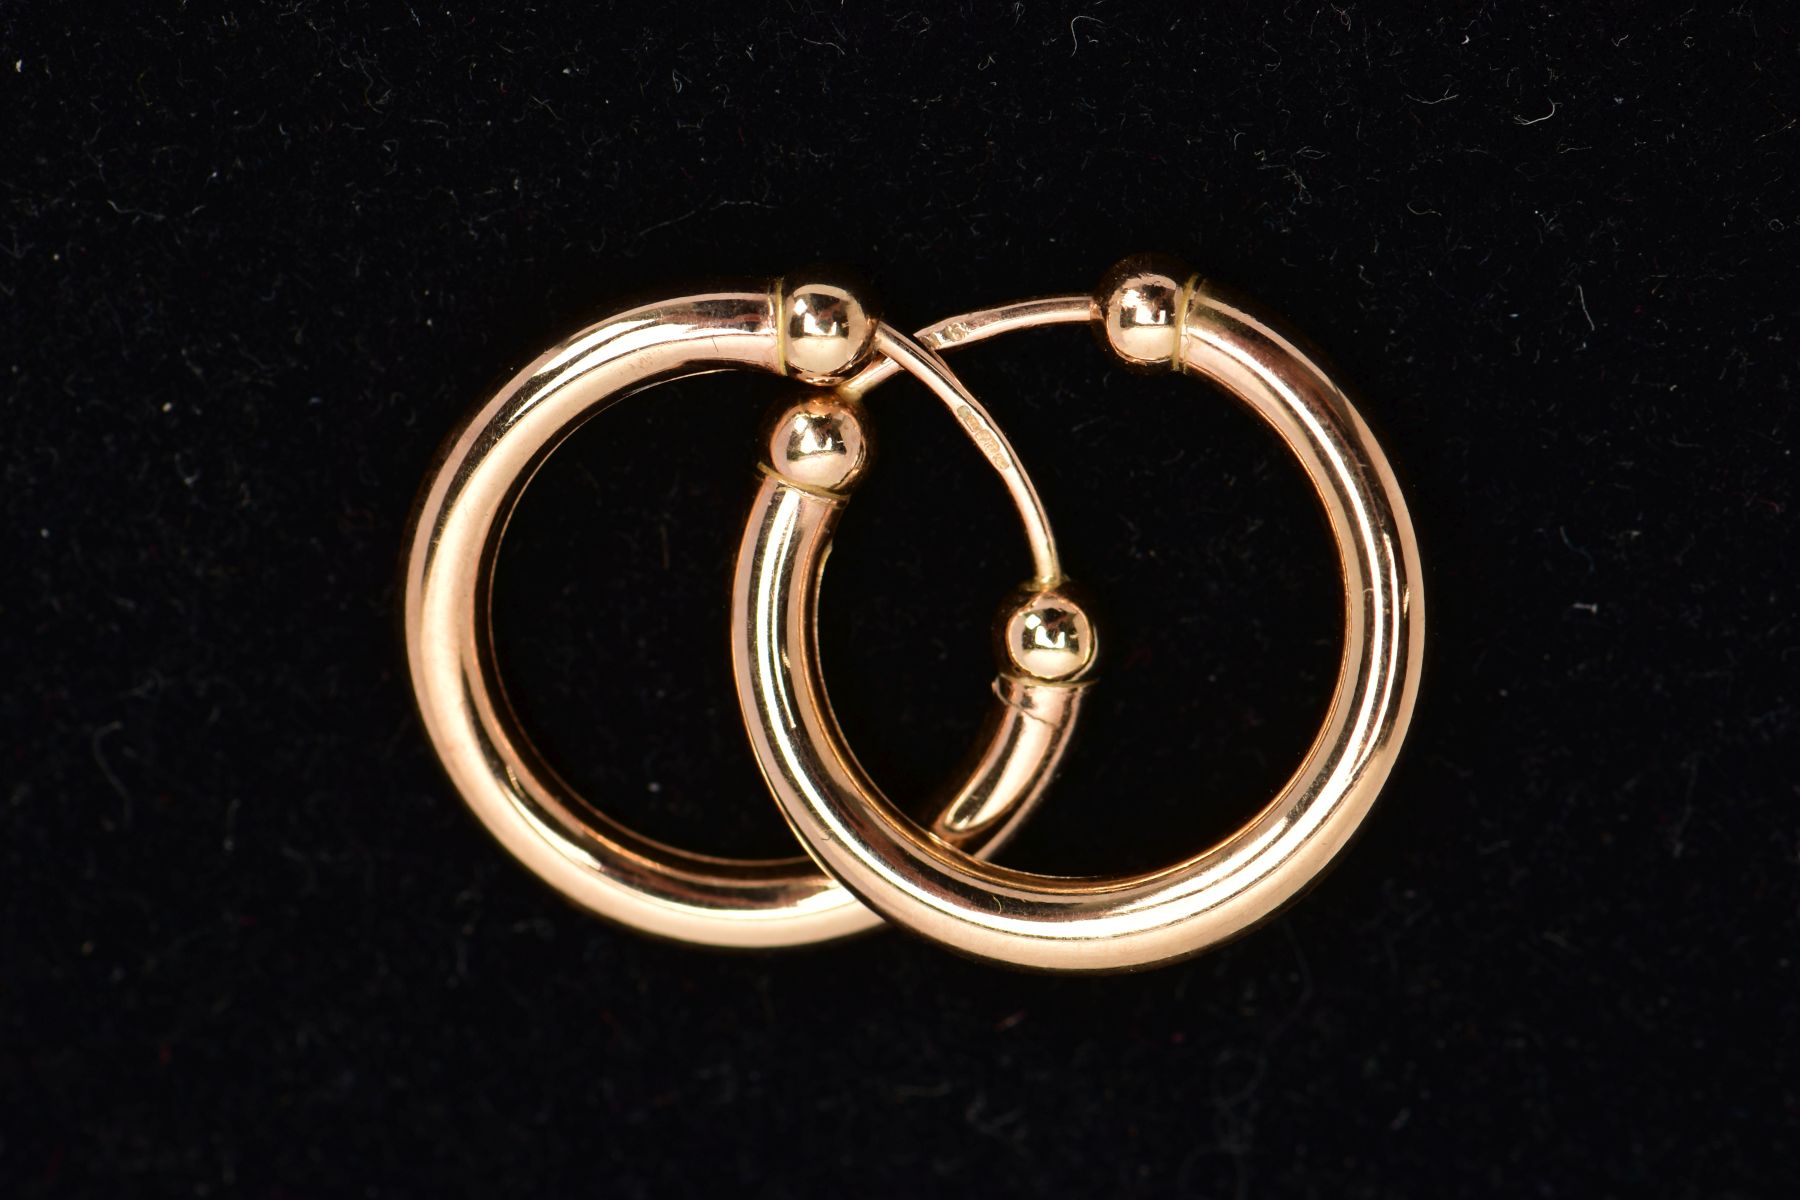 A PAIR OF 9CT GOLD EARRINGS, each hollow ear hoop of plain polished design with spherical bead - Image 2 of 2